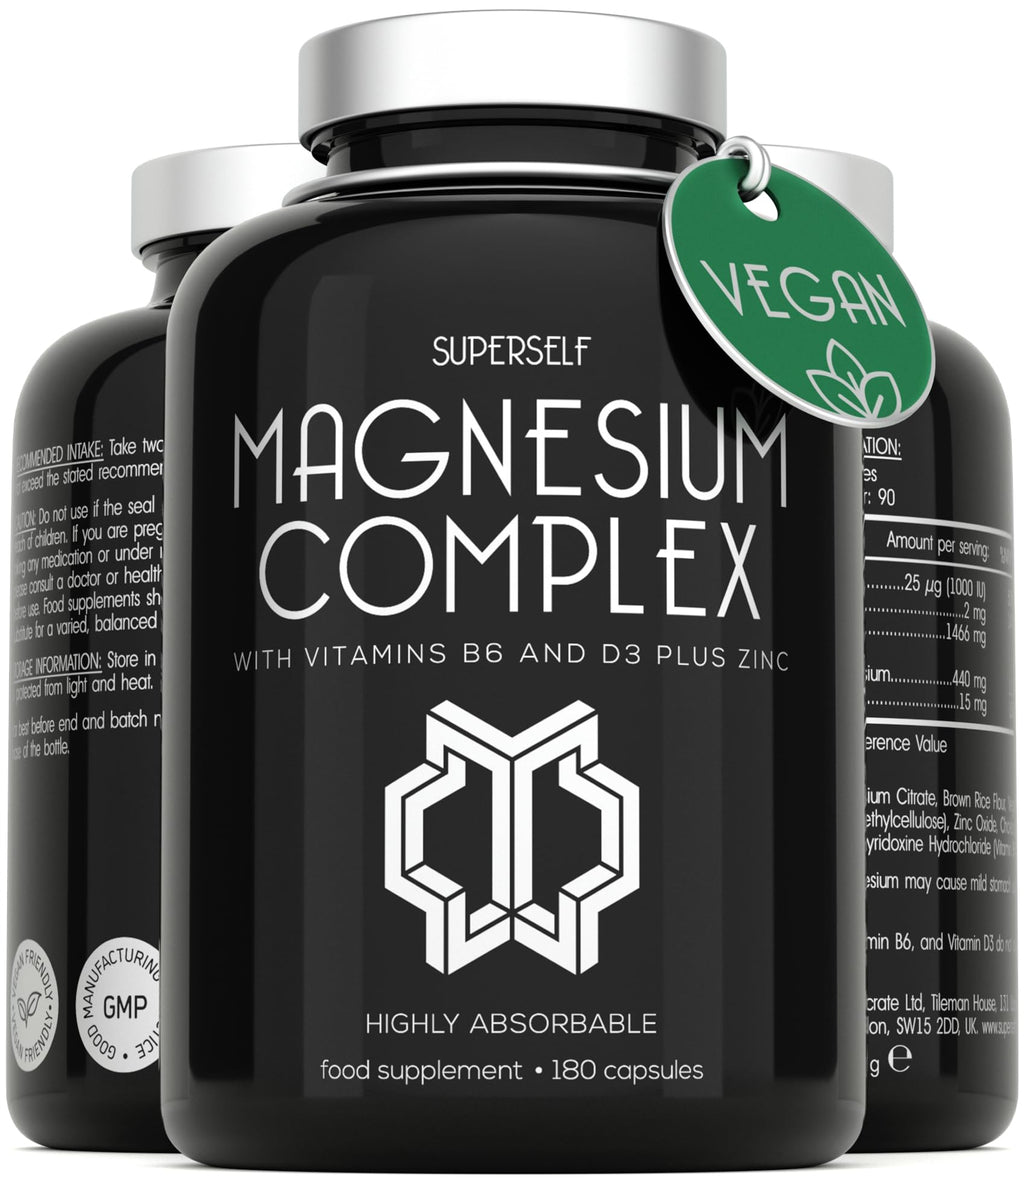 Magnesium Citrate Supplement with Zinc, Vitamin B6 and D3 - High Strength 180 Capsules - 1466mg Magnesium Supplements for Women & Men - Magnesium Complex Tablets Providing 440mg Elemental Magnesium - BeesActive Australia